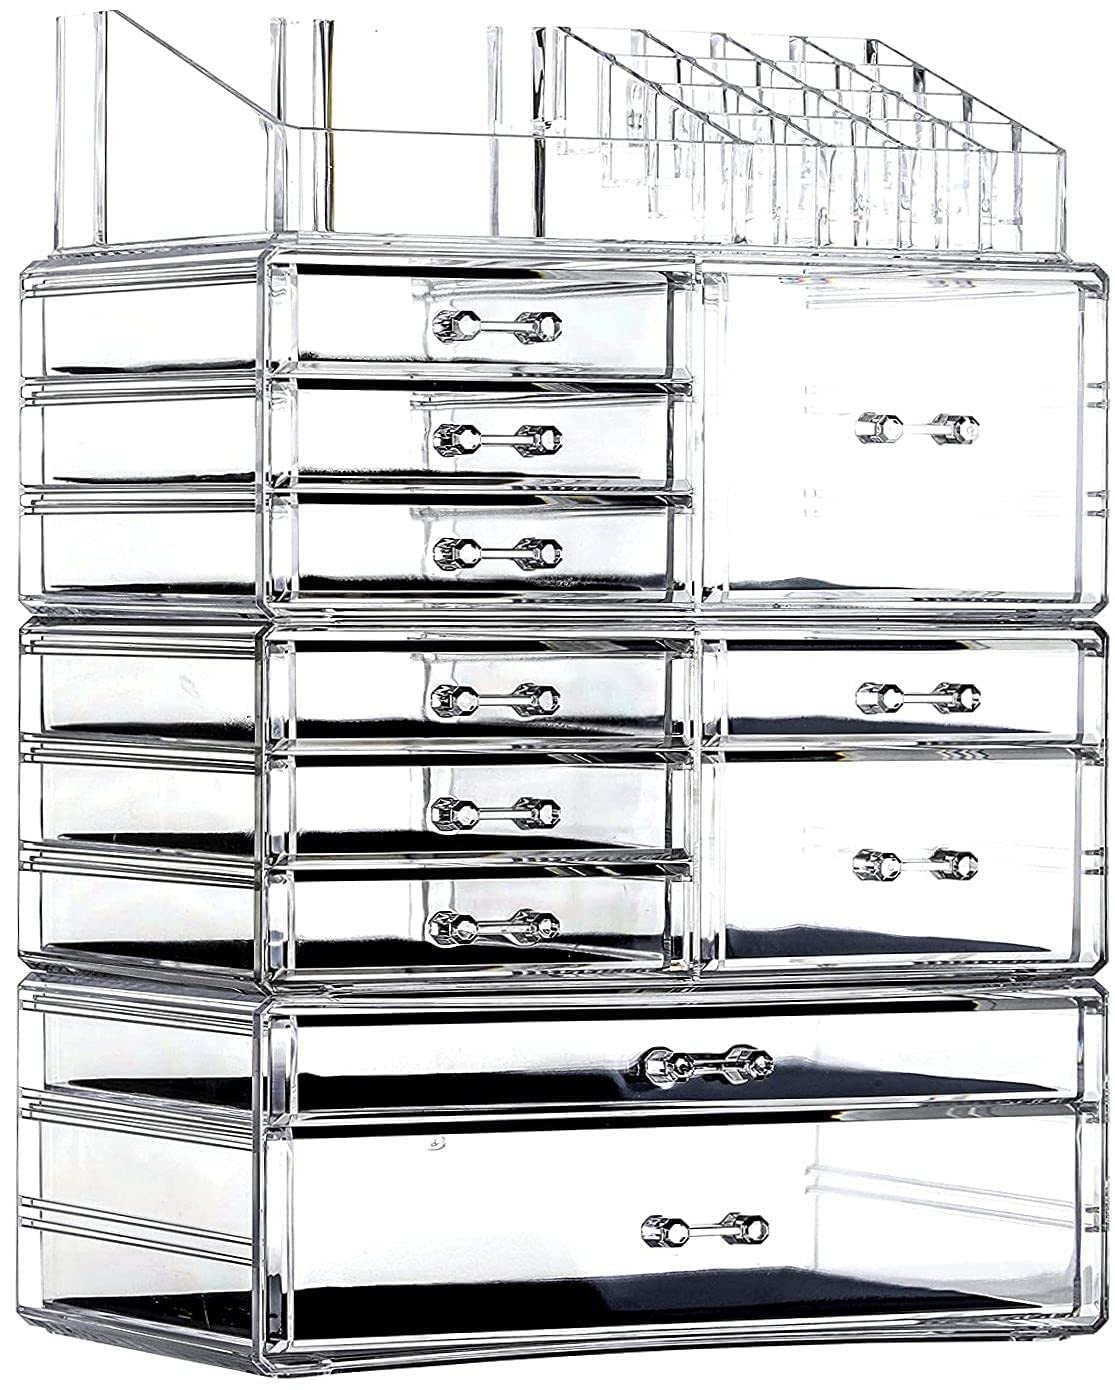 Cq acrylic cq acrylic Makeup Organizer Skin care Large clear cosmetic  Display cases Stackable Storage Box With 7 Drawers,Set of 3